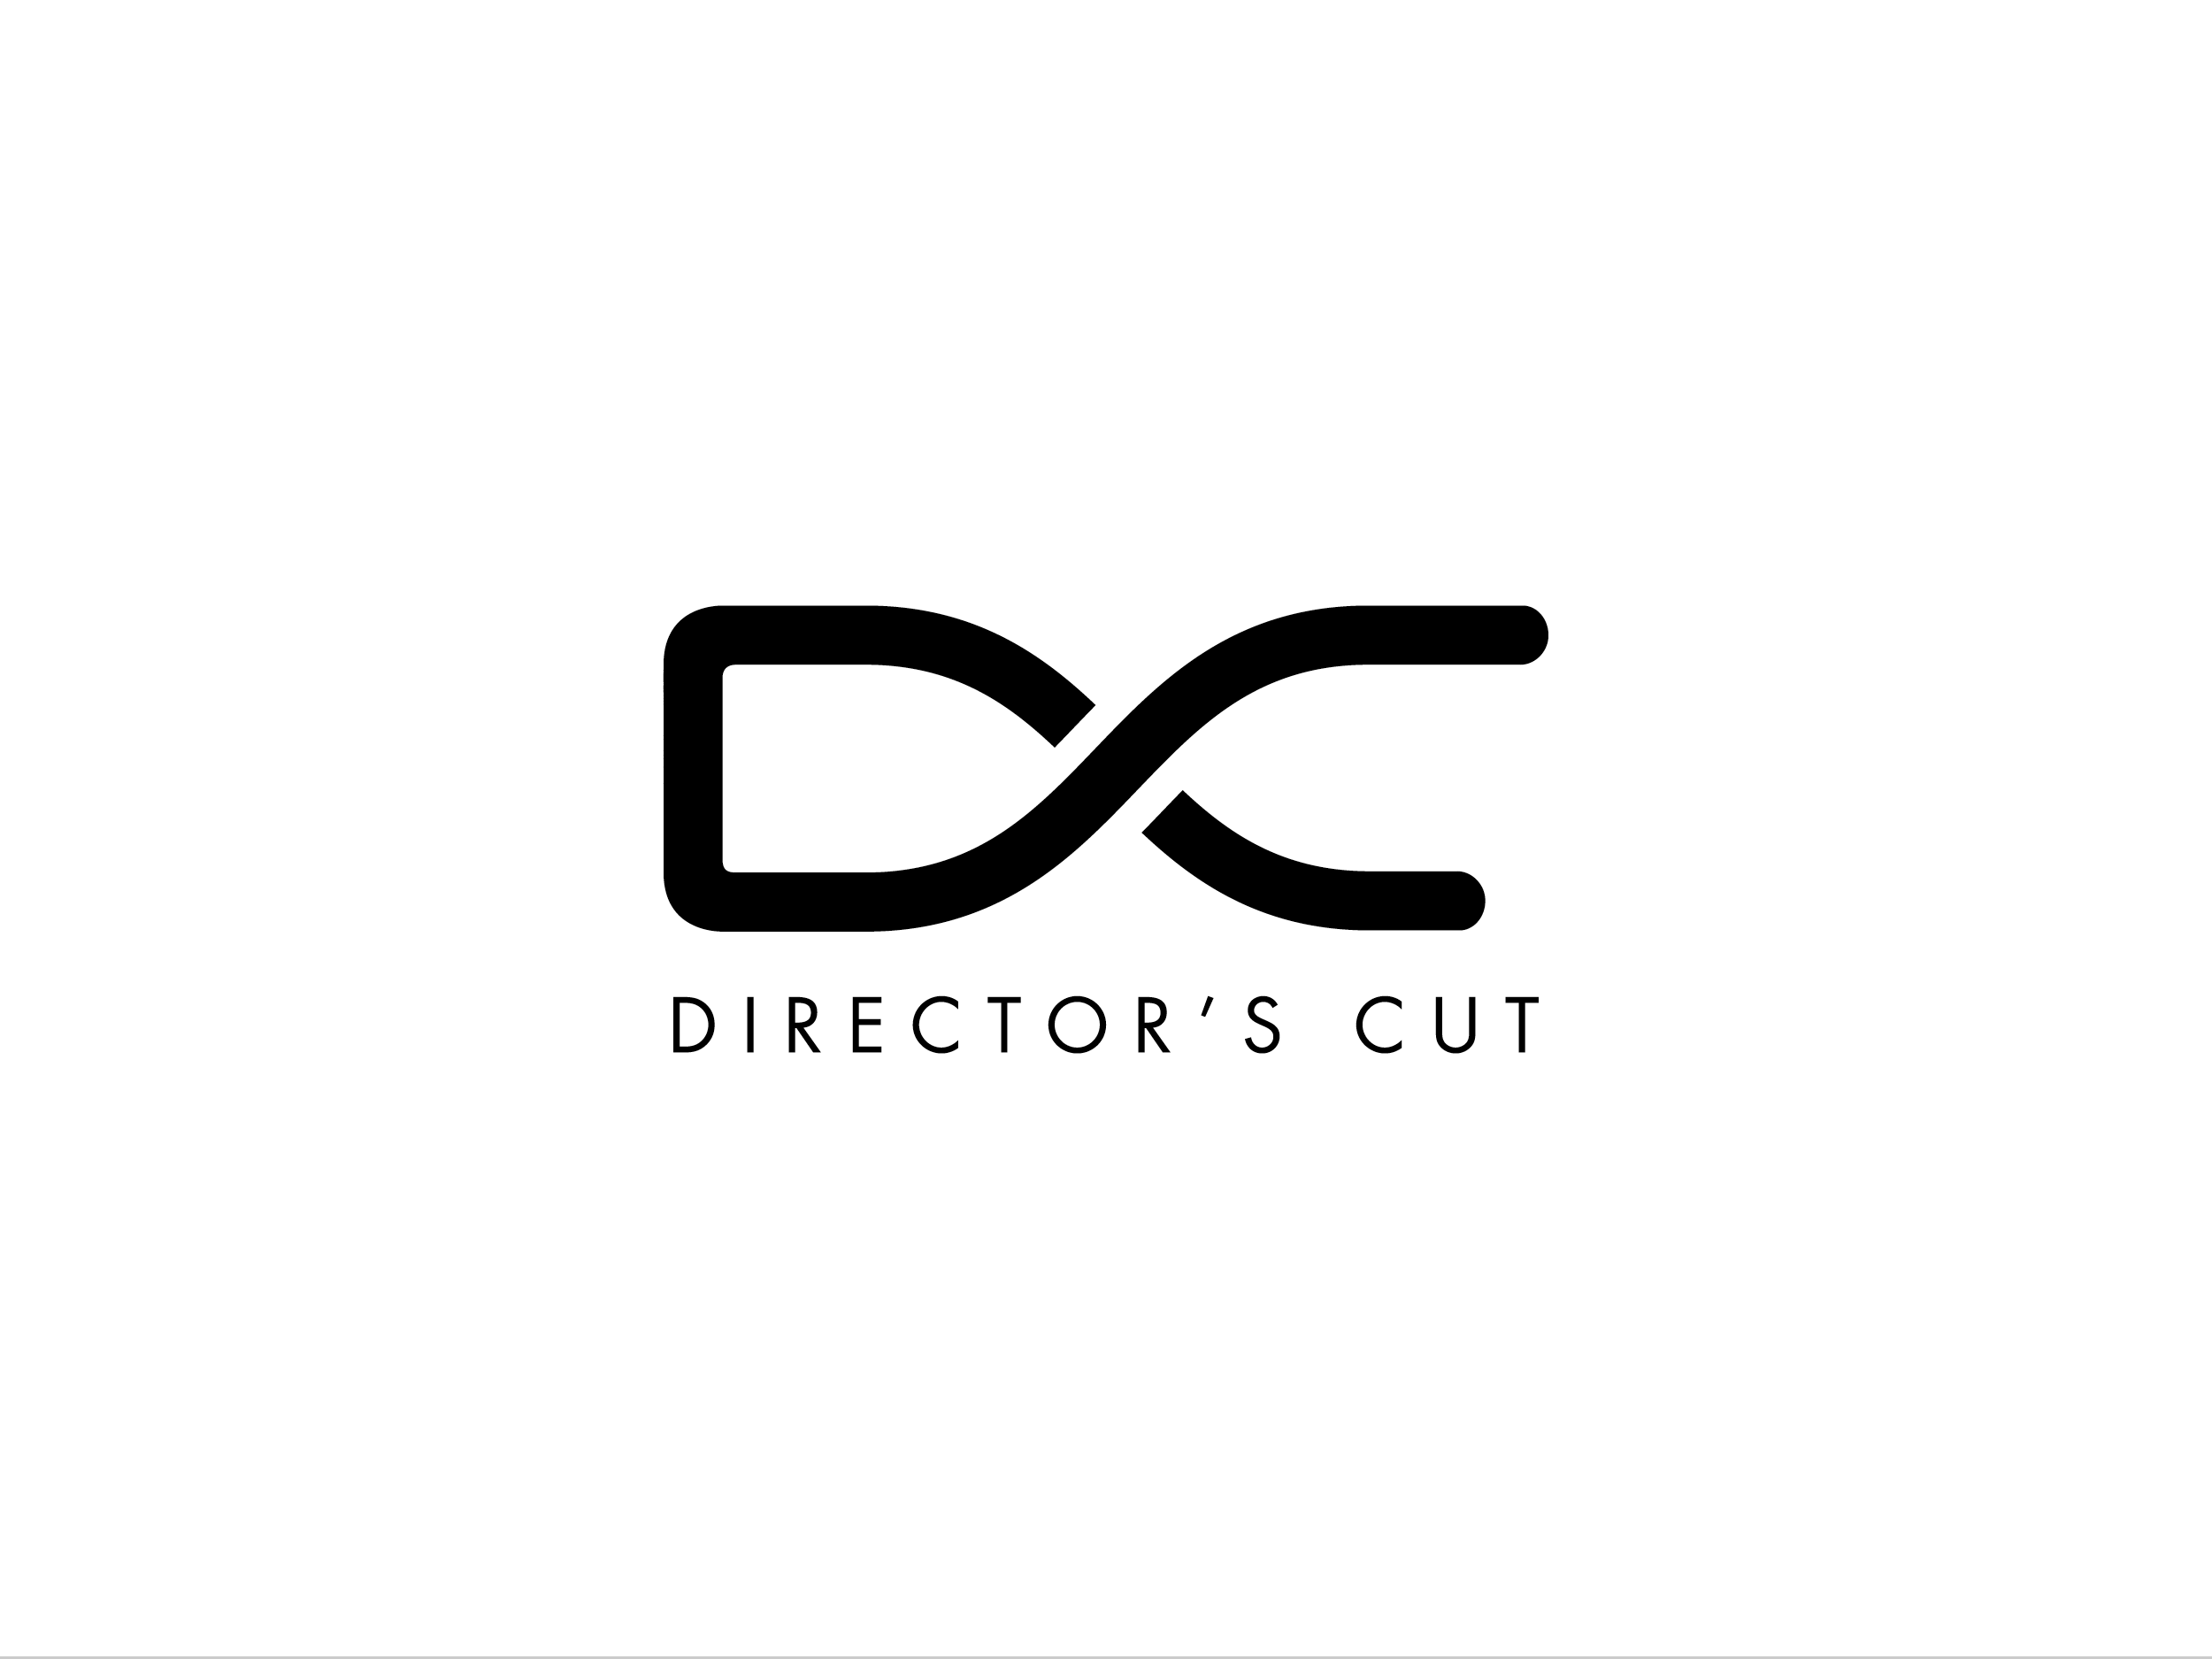  Director’s Cut, TV and event production company 